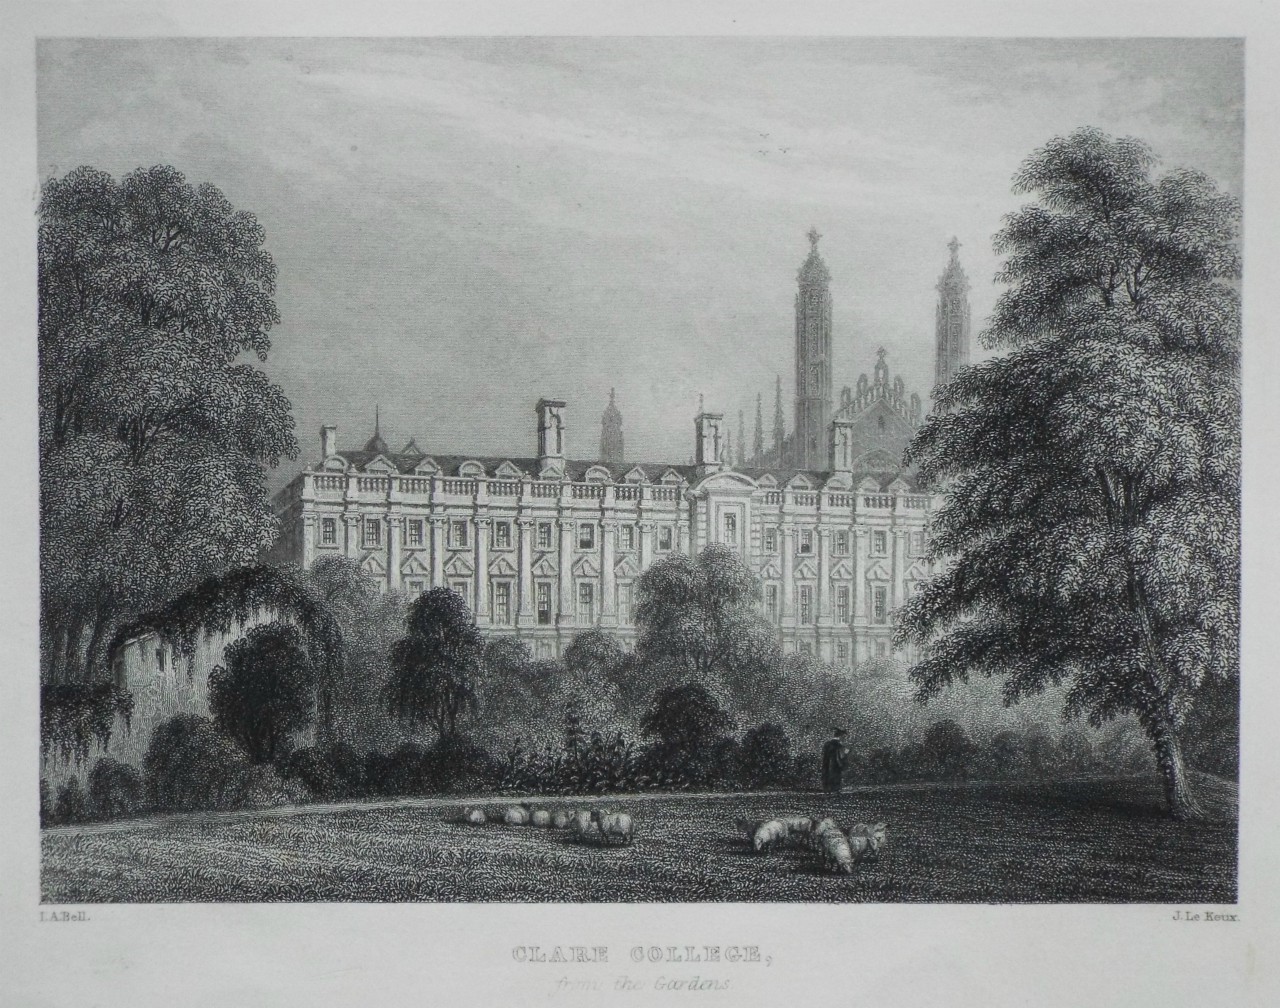 Print - Clare College, from the Gardens. - Le